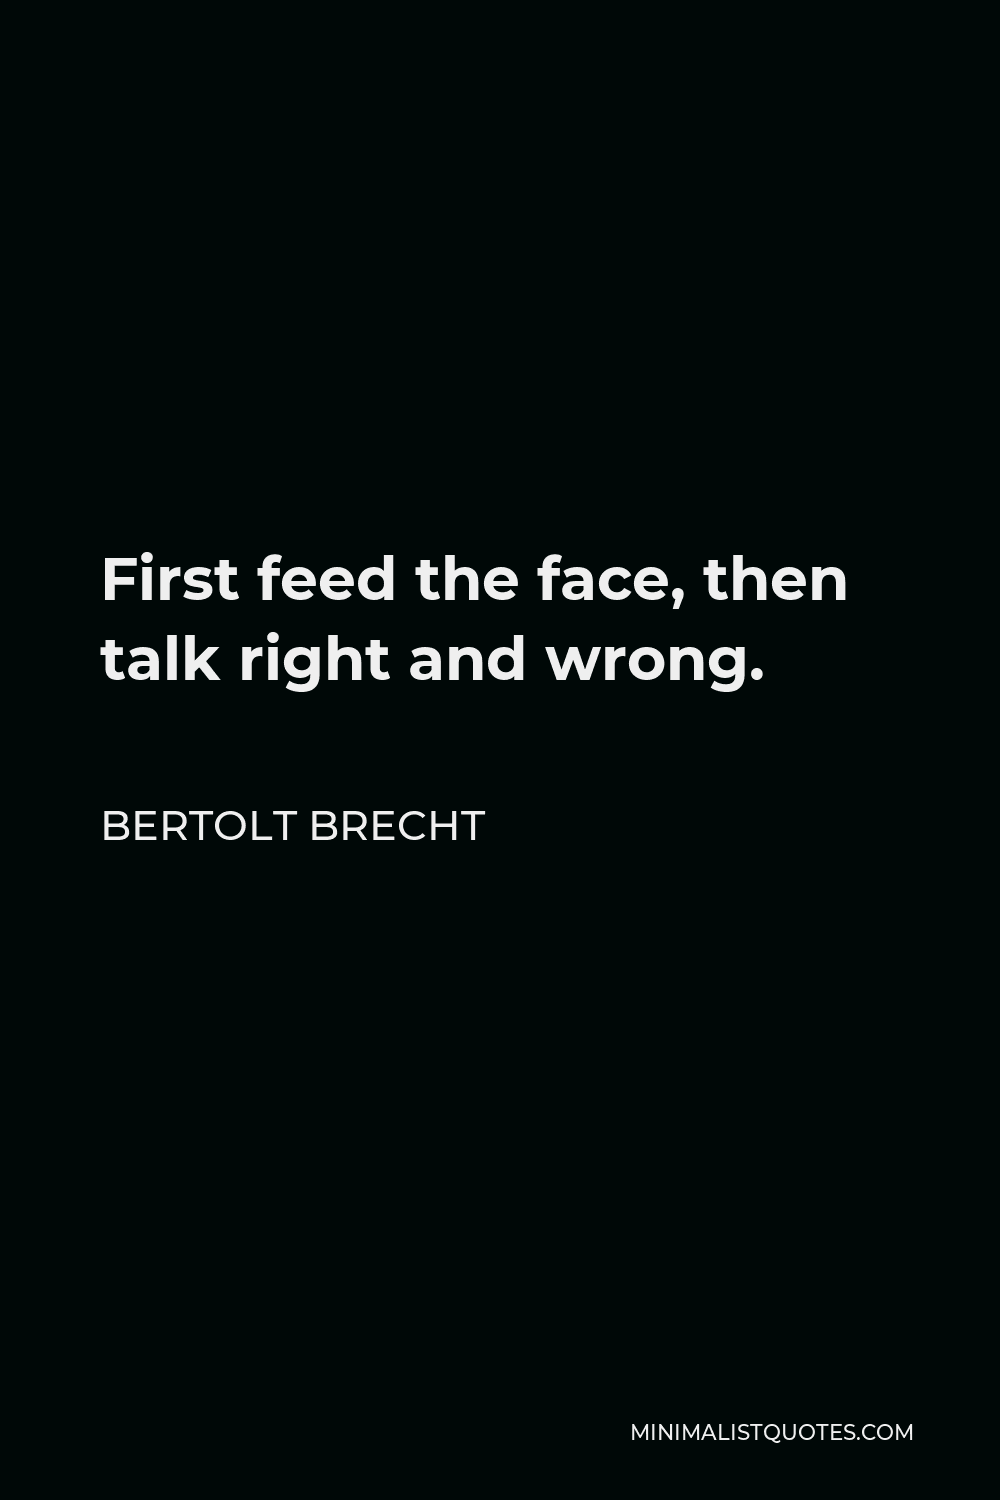 Bertolt Brecht Quote - First feed the face, then talk right and wrong.